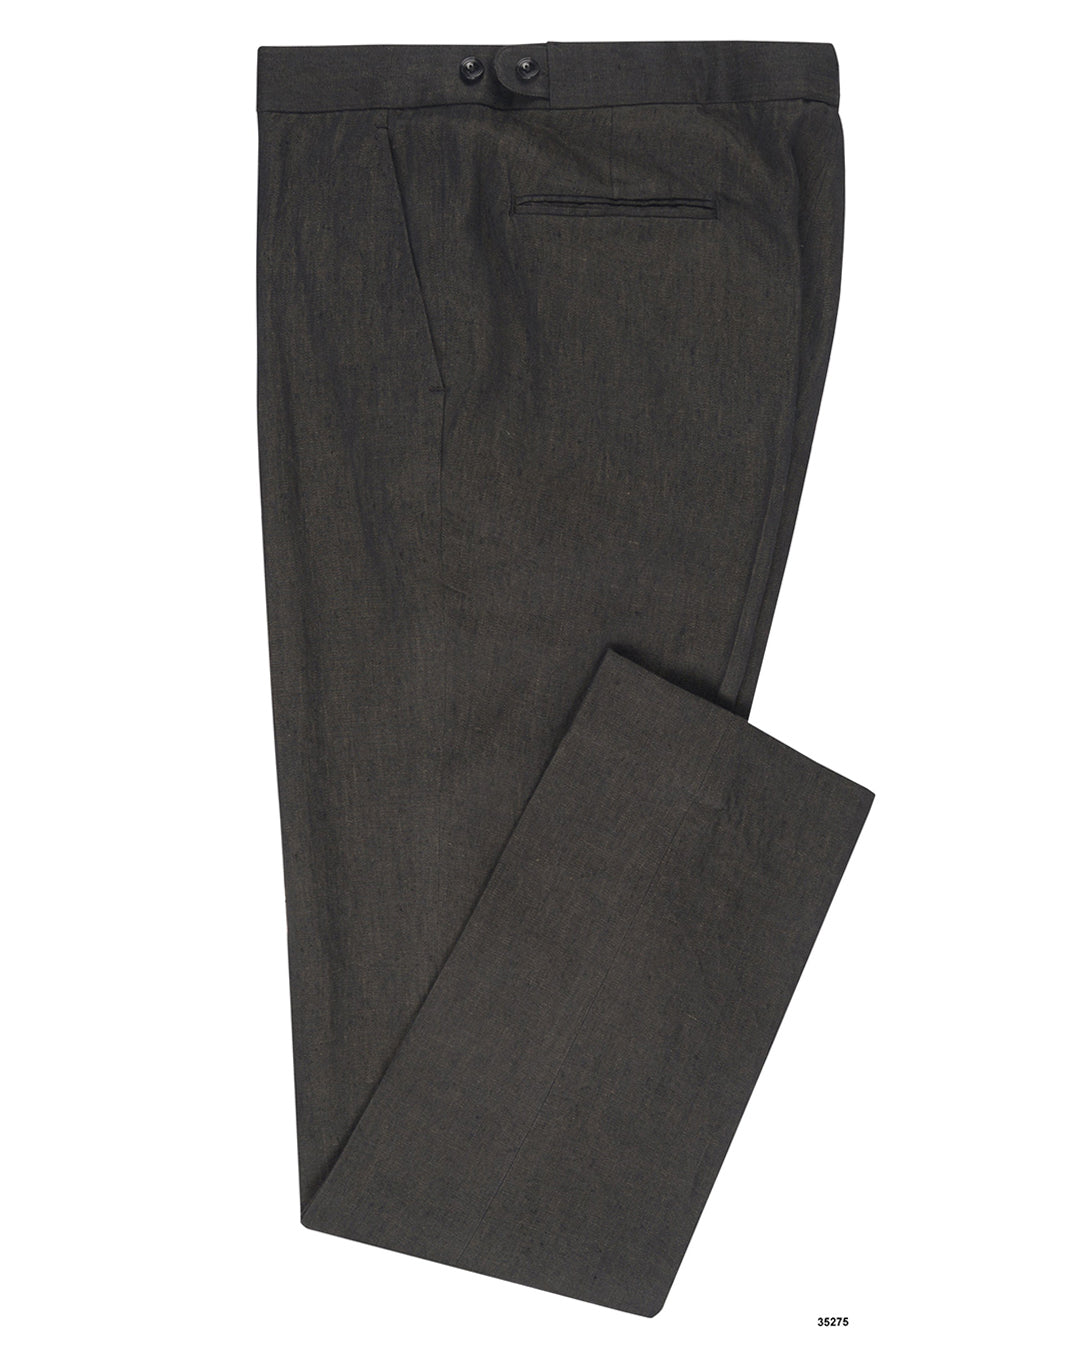 Side view of custom linen pants for men by Luxire in dark brown